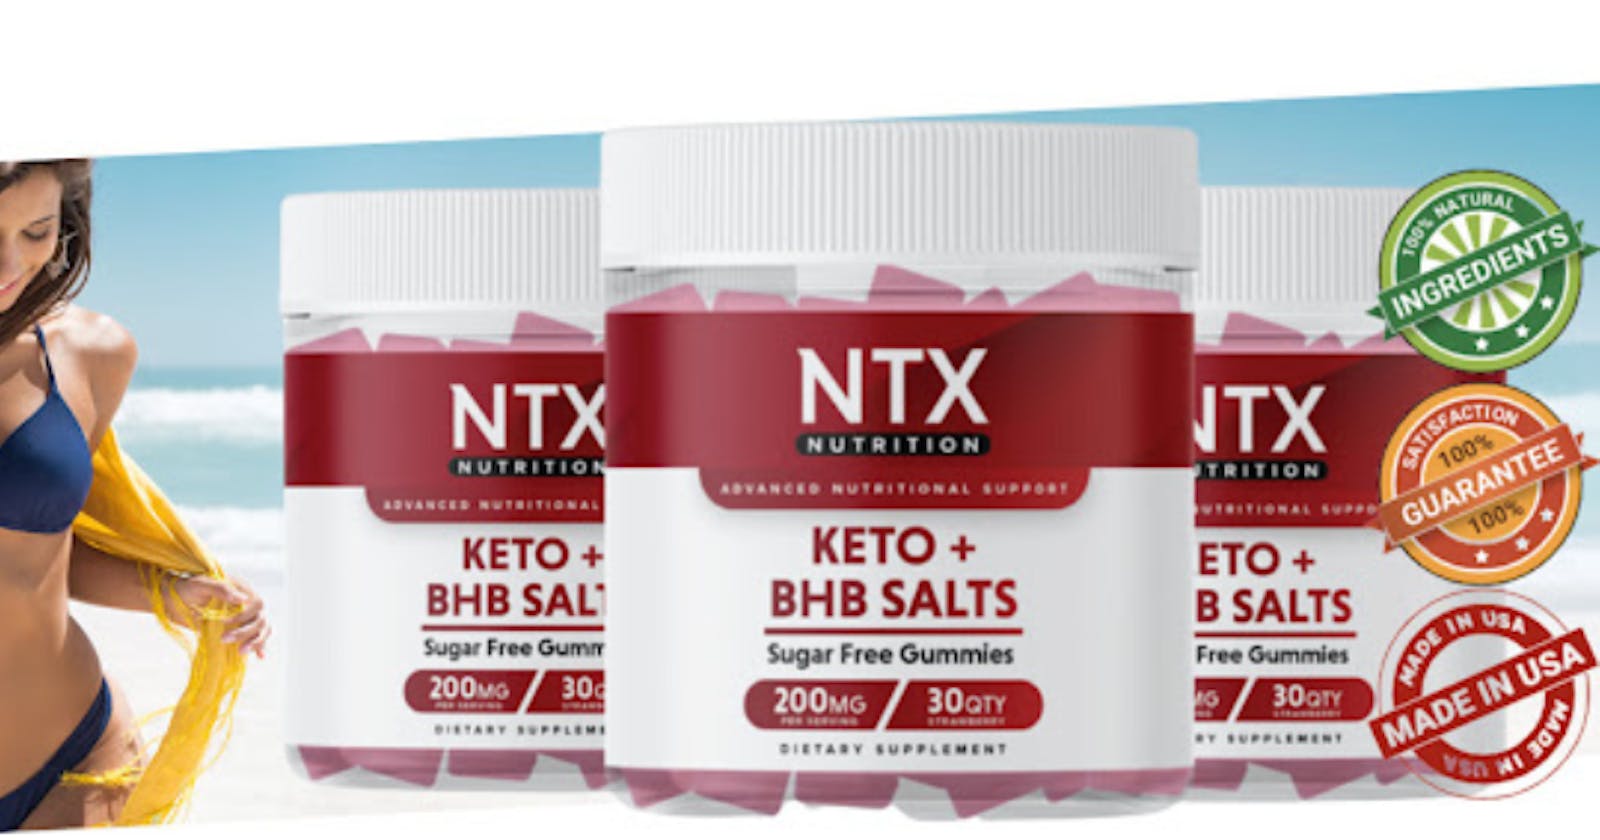 NTX Keto BHB Gummies Reviews - Don't Waste Your Cash Without Read This!